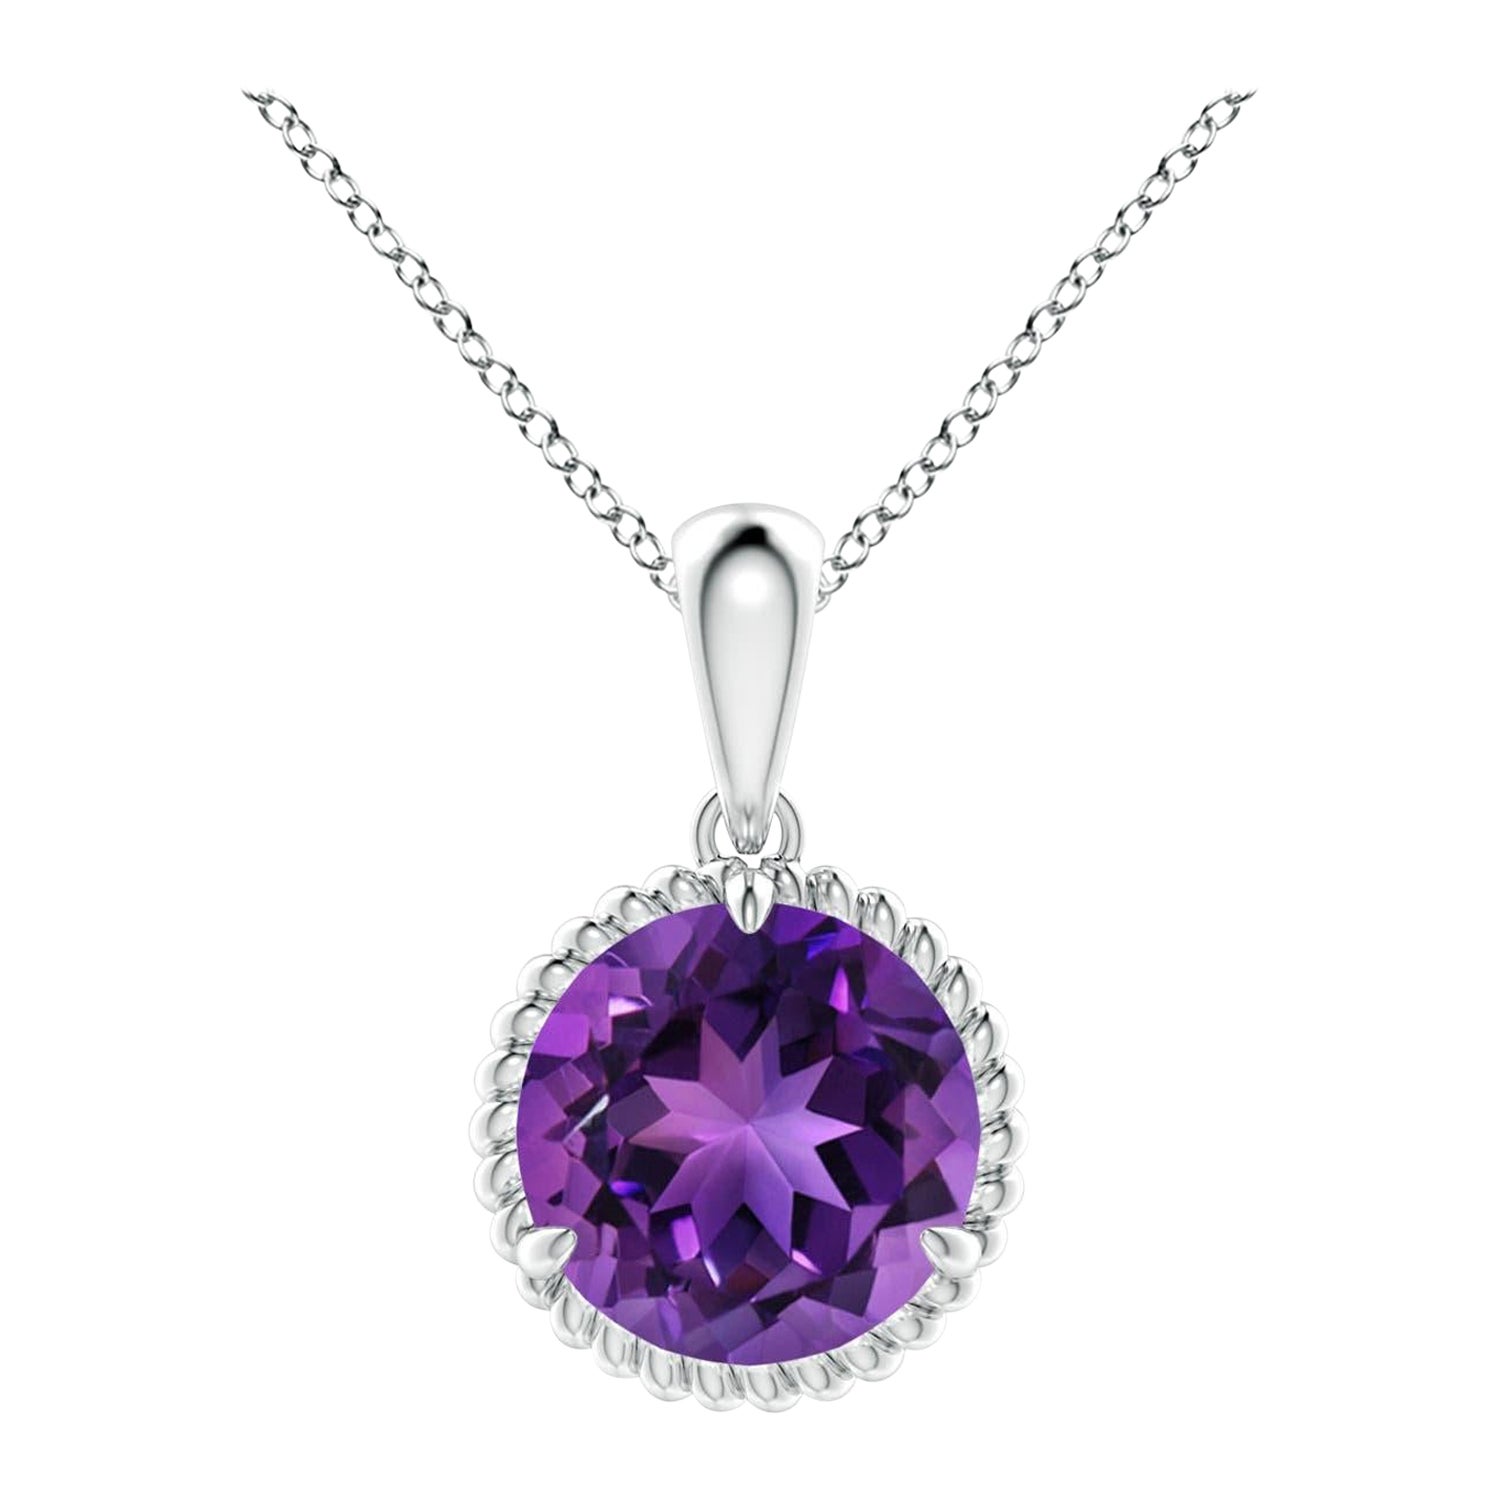 Natural Rope-Framed 1.7ct Amethyst Solitaire Pendant in 14K White Gold